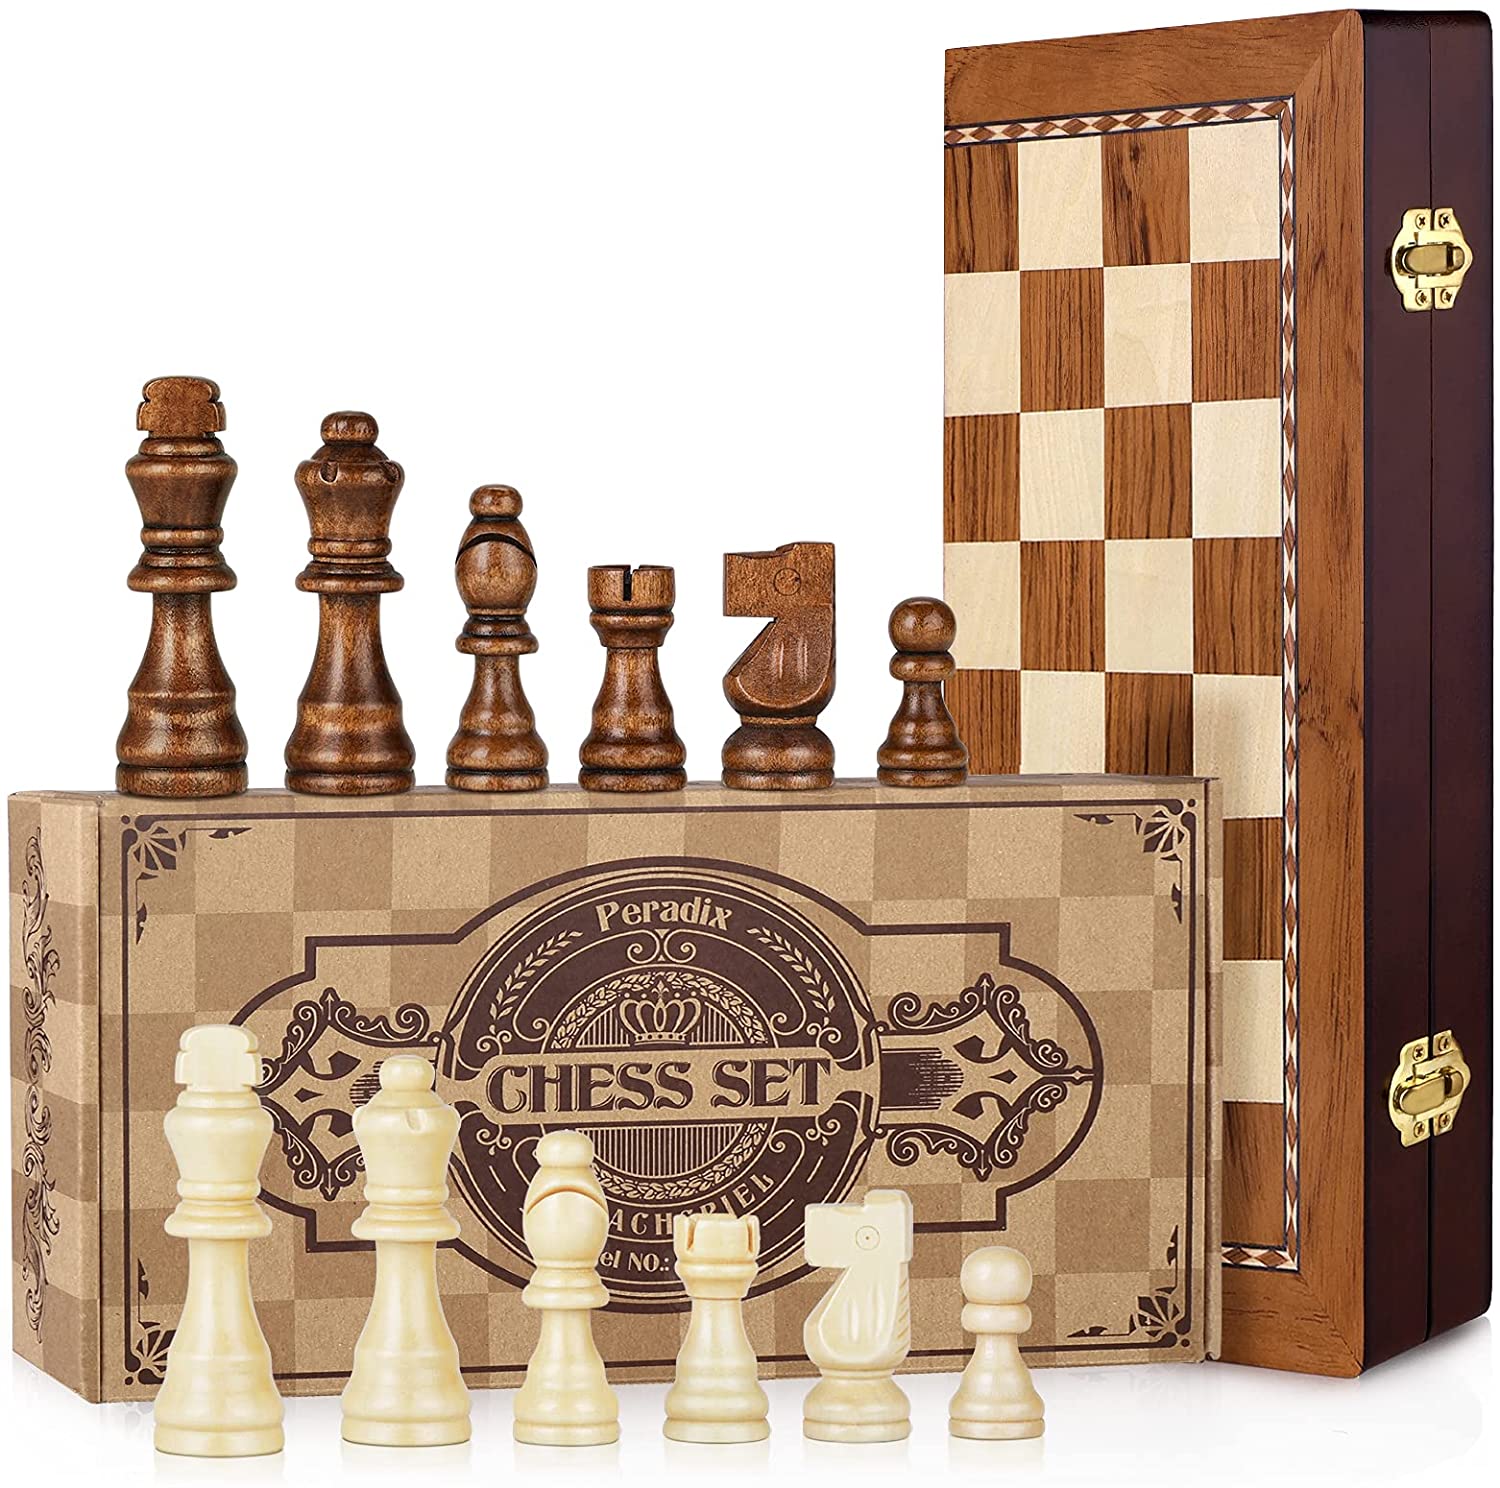 Christmas Chess Gifts for Men Women Travel Folding Chess Board Game Set with Storage Slots Peradix Magnetic Wooden Chess Set 2 Extra Queens Handmade Staunton Wood Chess Pieces 13.78 